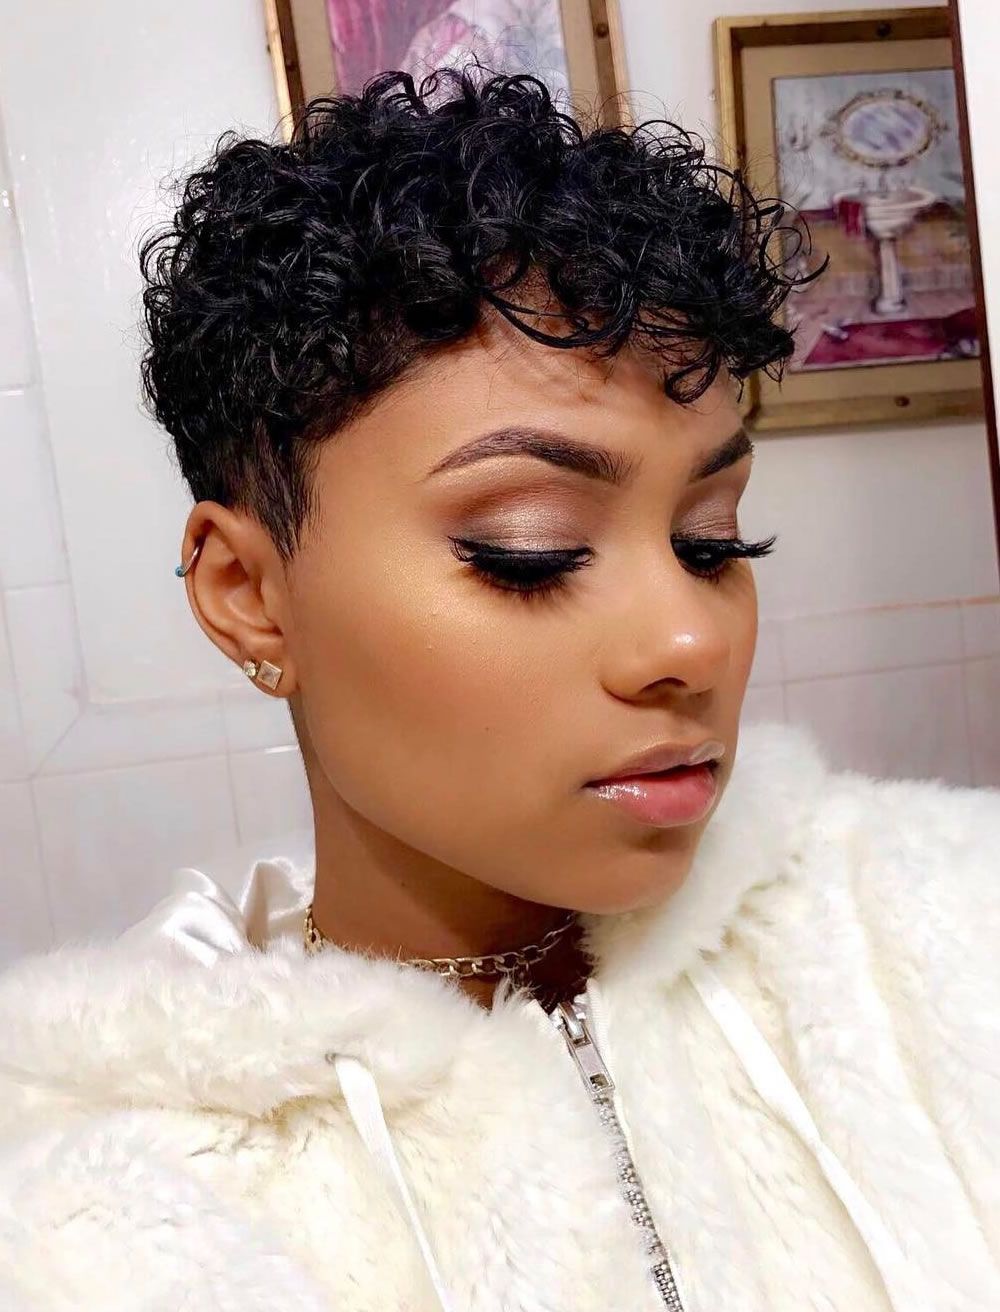 Curly Natural Short Hair Hairstyles For Black Women – Hairstyles Inside Black Woman Short Haircuts (View 15 of 25)